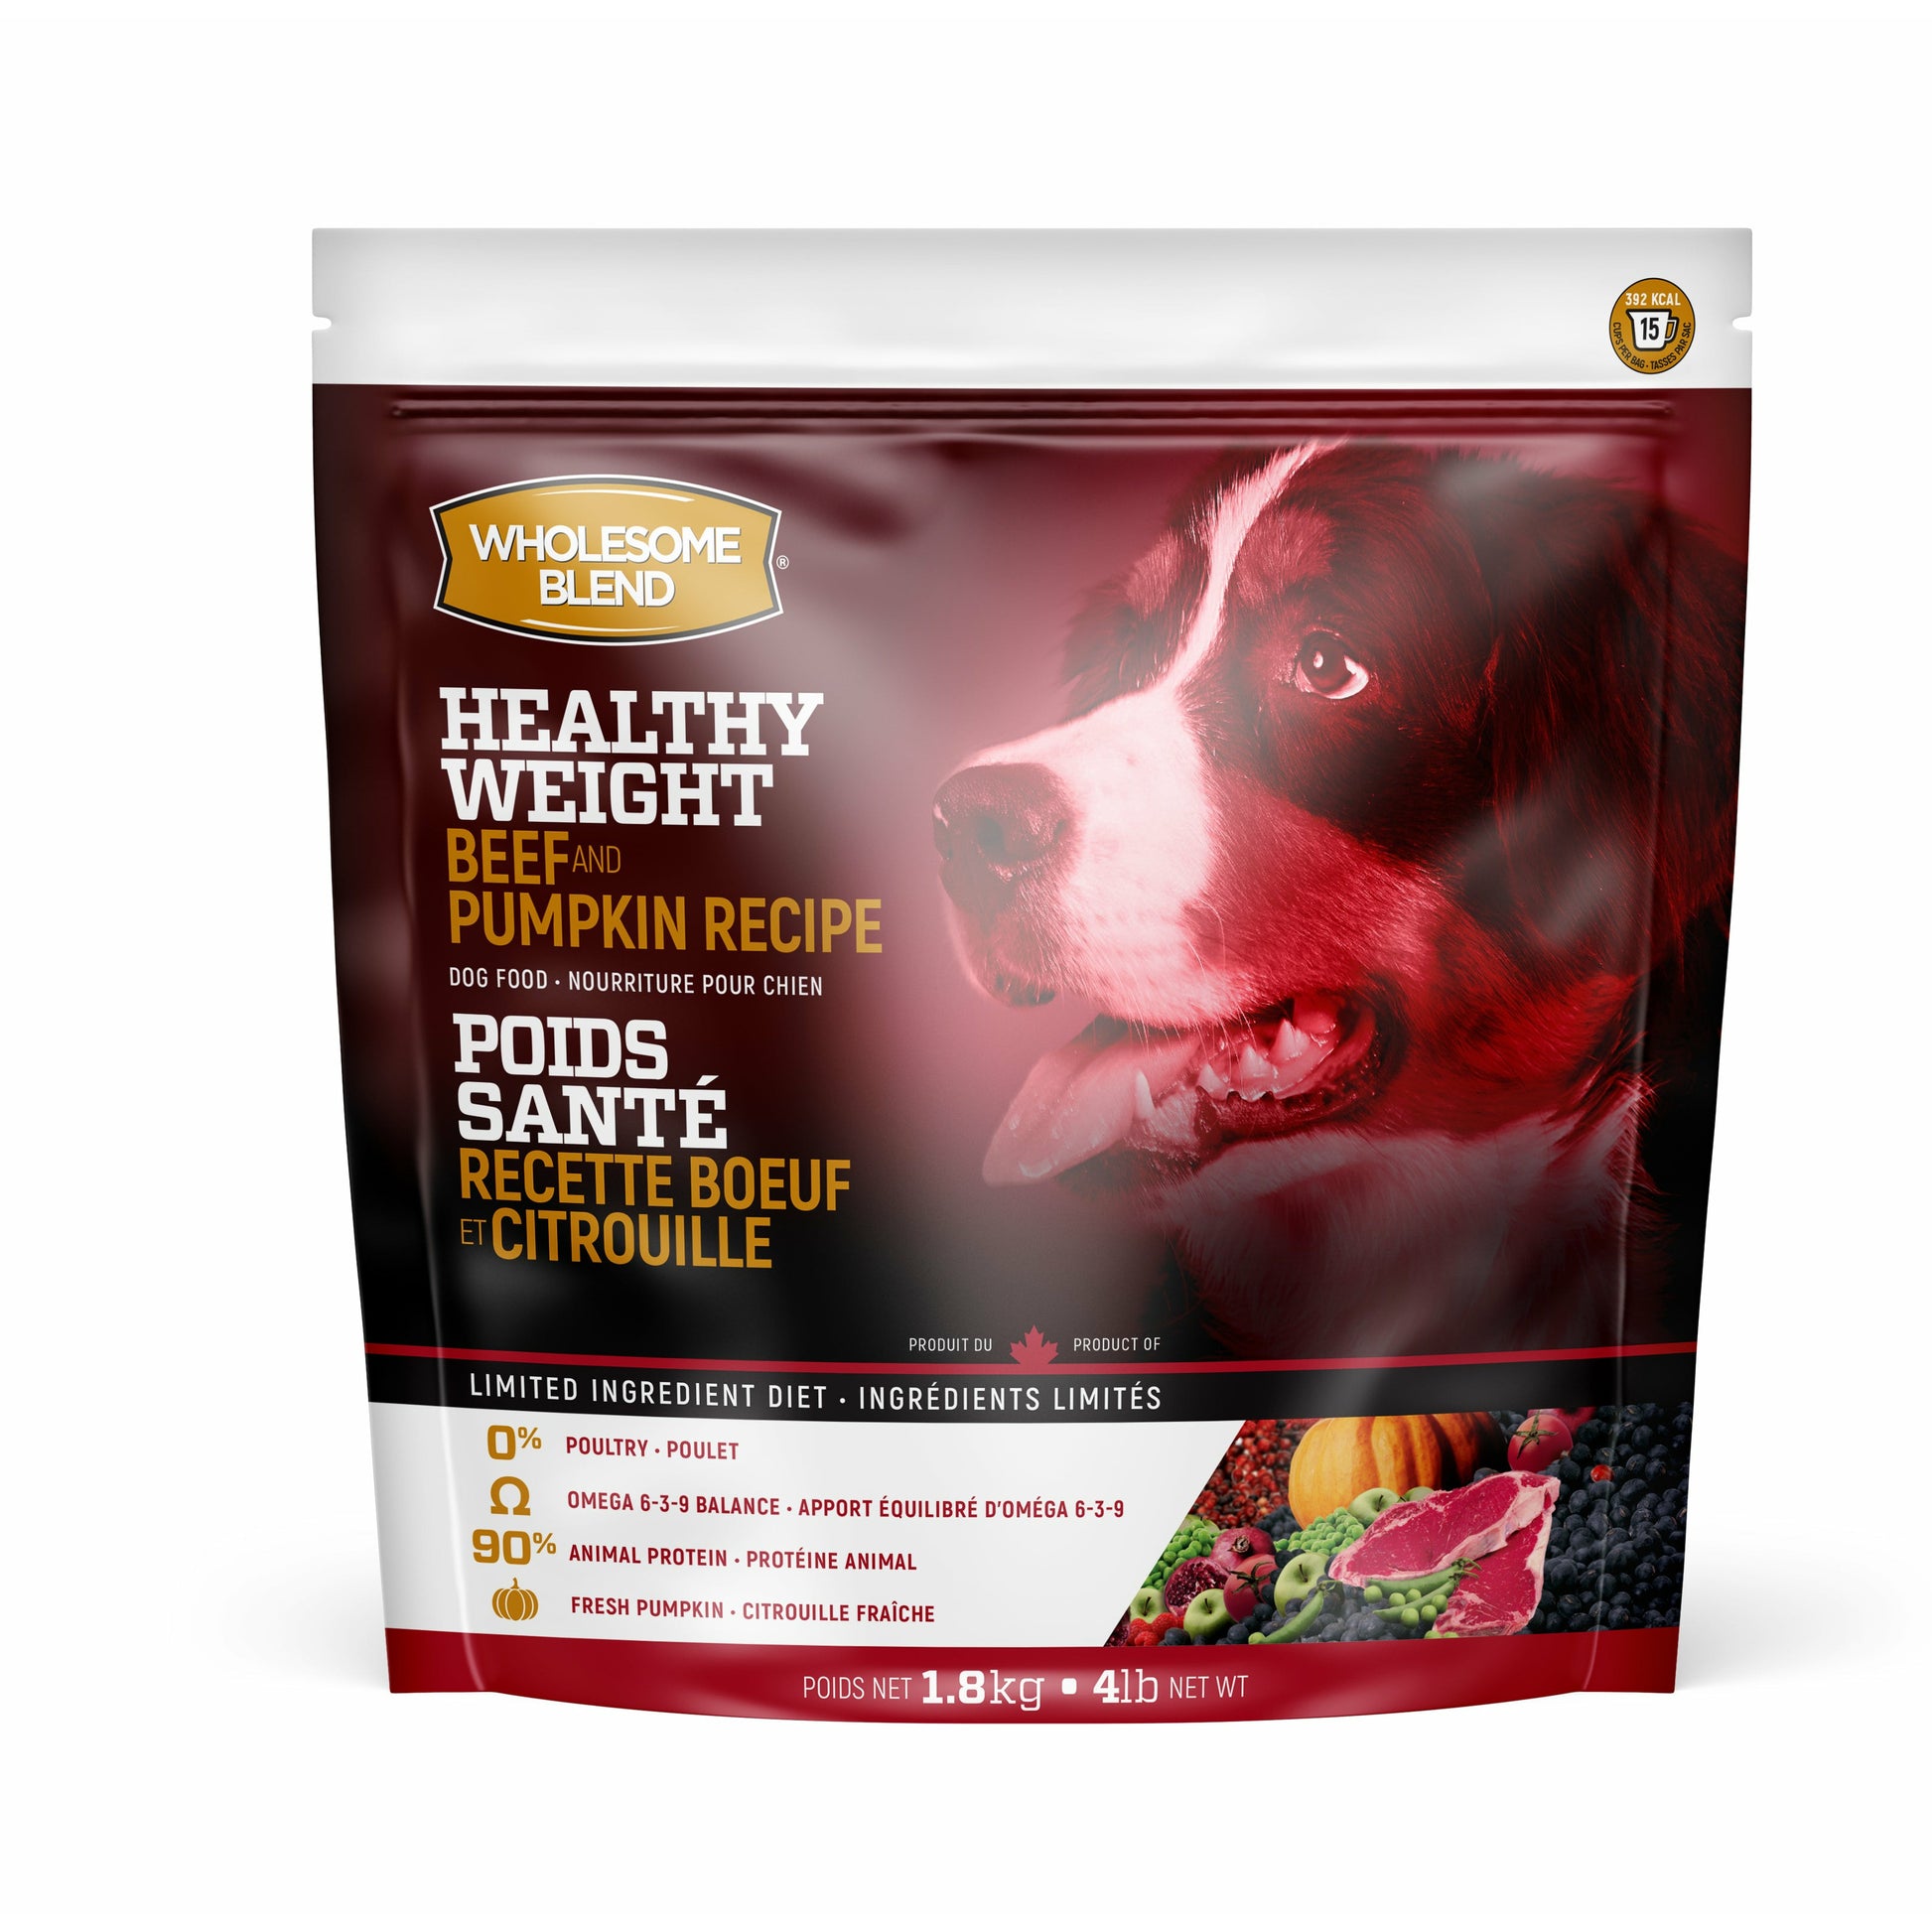 Wholesome Blend Dog Food Healthy Weight Beef & Pumpkin Recipe 1.8 Kg Dog Food 1.8 Kg | PetMax Canada